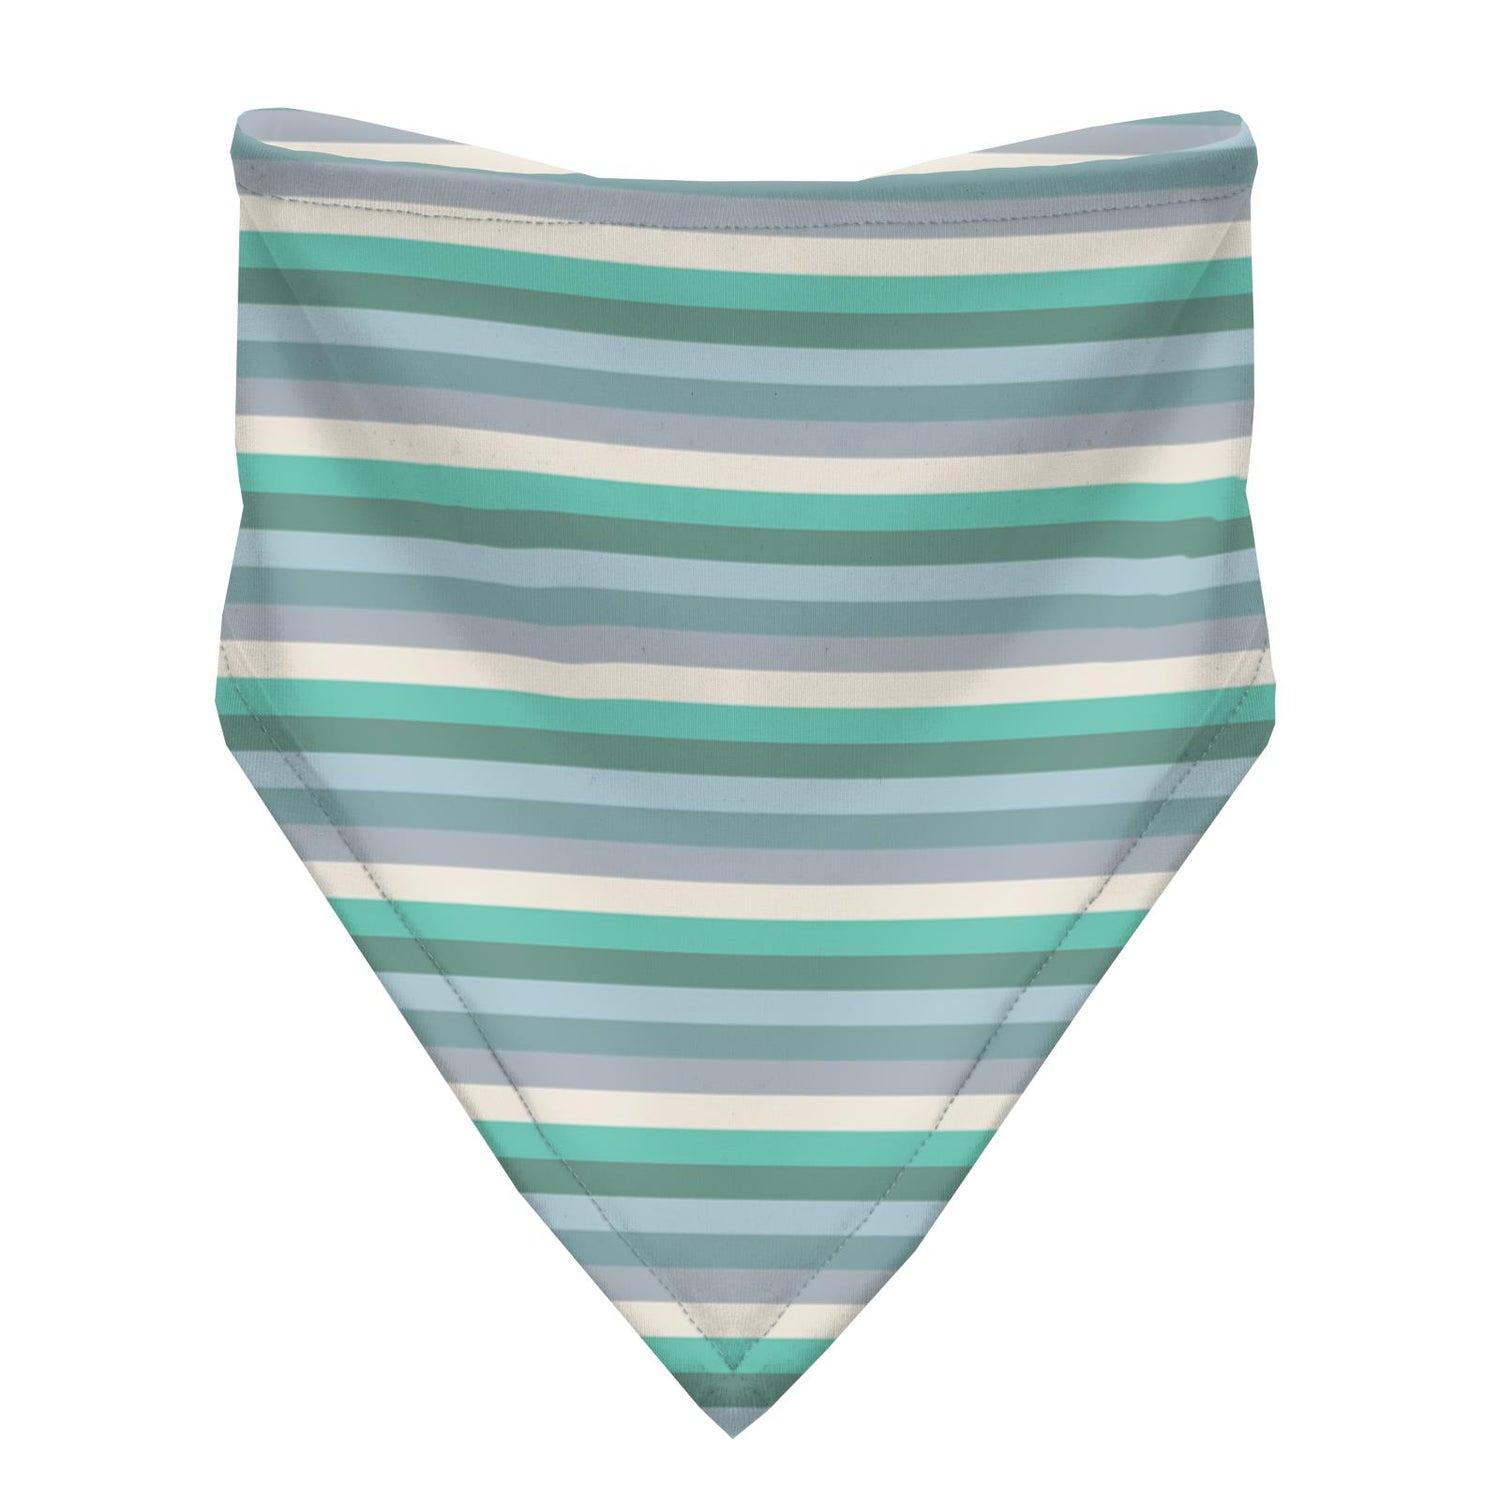 Print Bandana Bib Set of 3 in Spring Sky Pussy Willows, Natural and April Showers Stripe